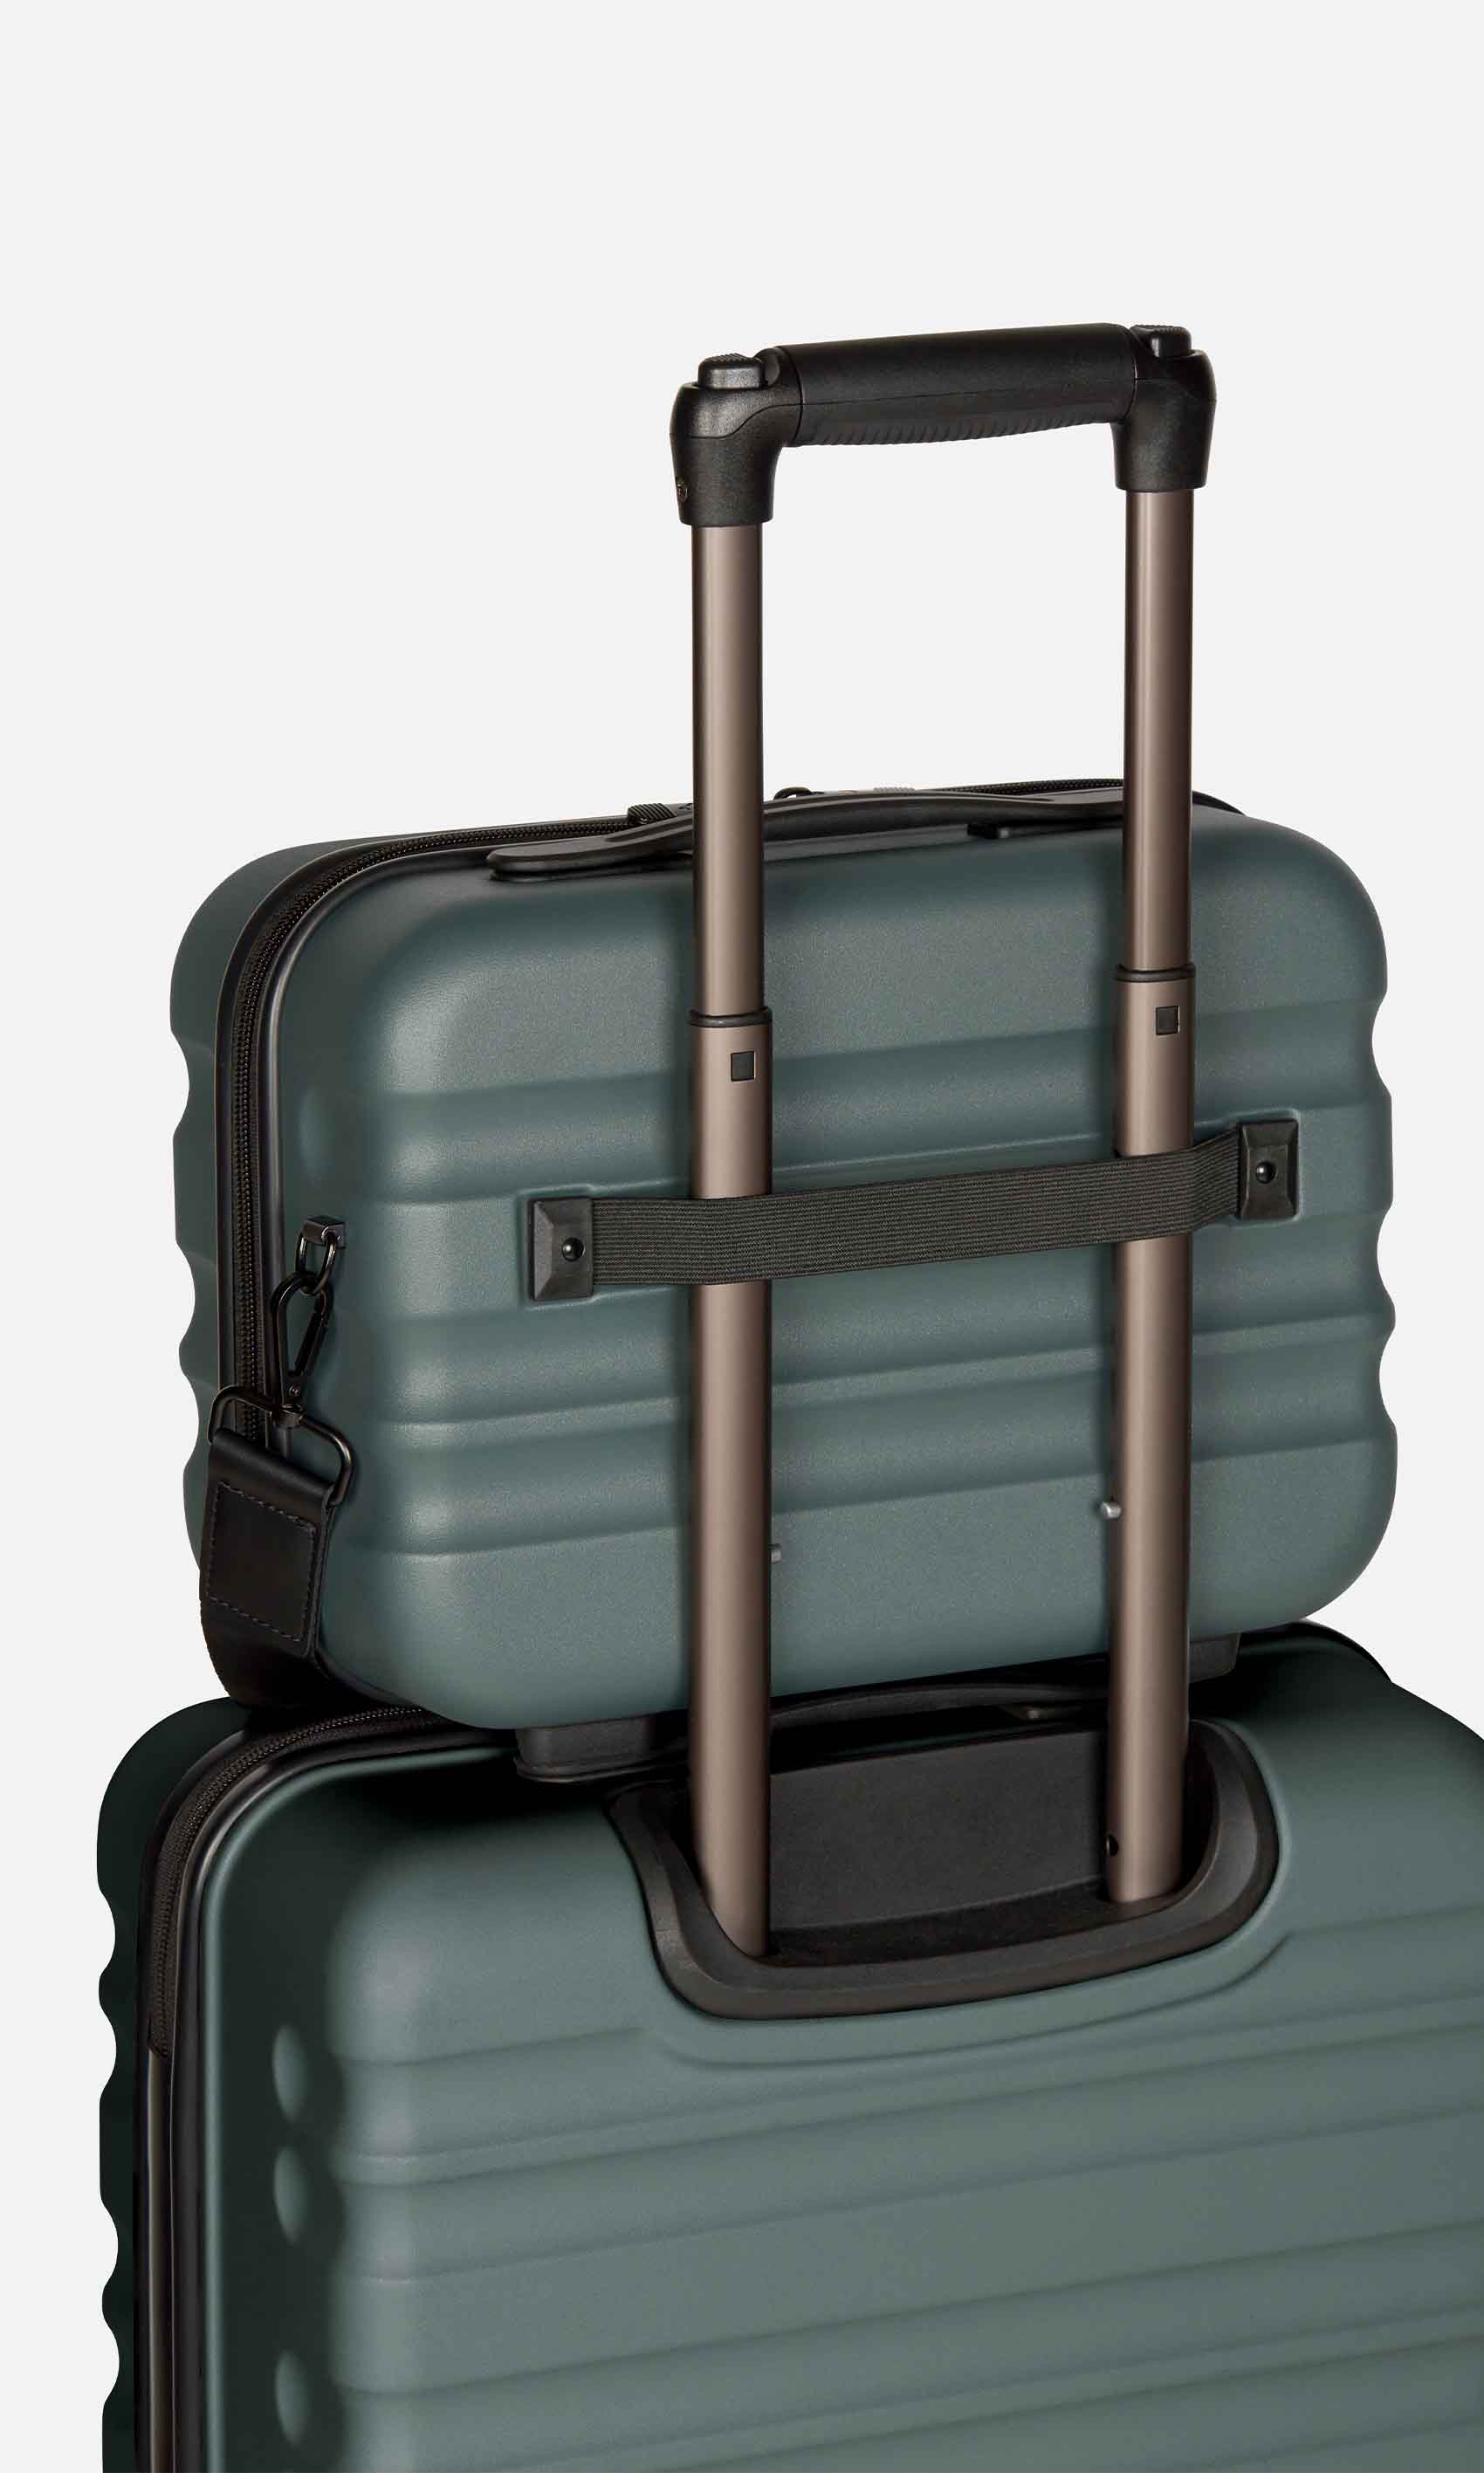 Antler Luggage -  Clifton vanity case in sycamore - Hard Suitcases Clifton Vanity Case Sycamore (Green) | Travel Accessories & Gifts | Antler 